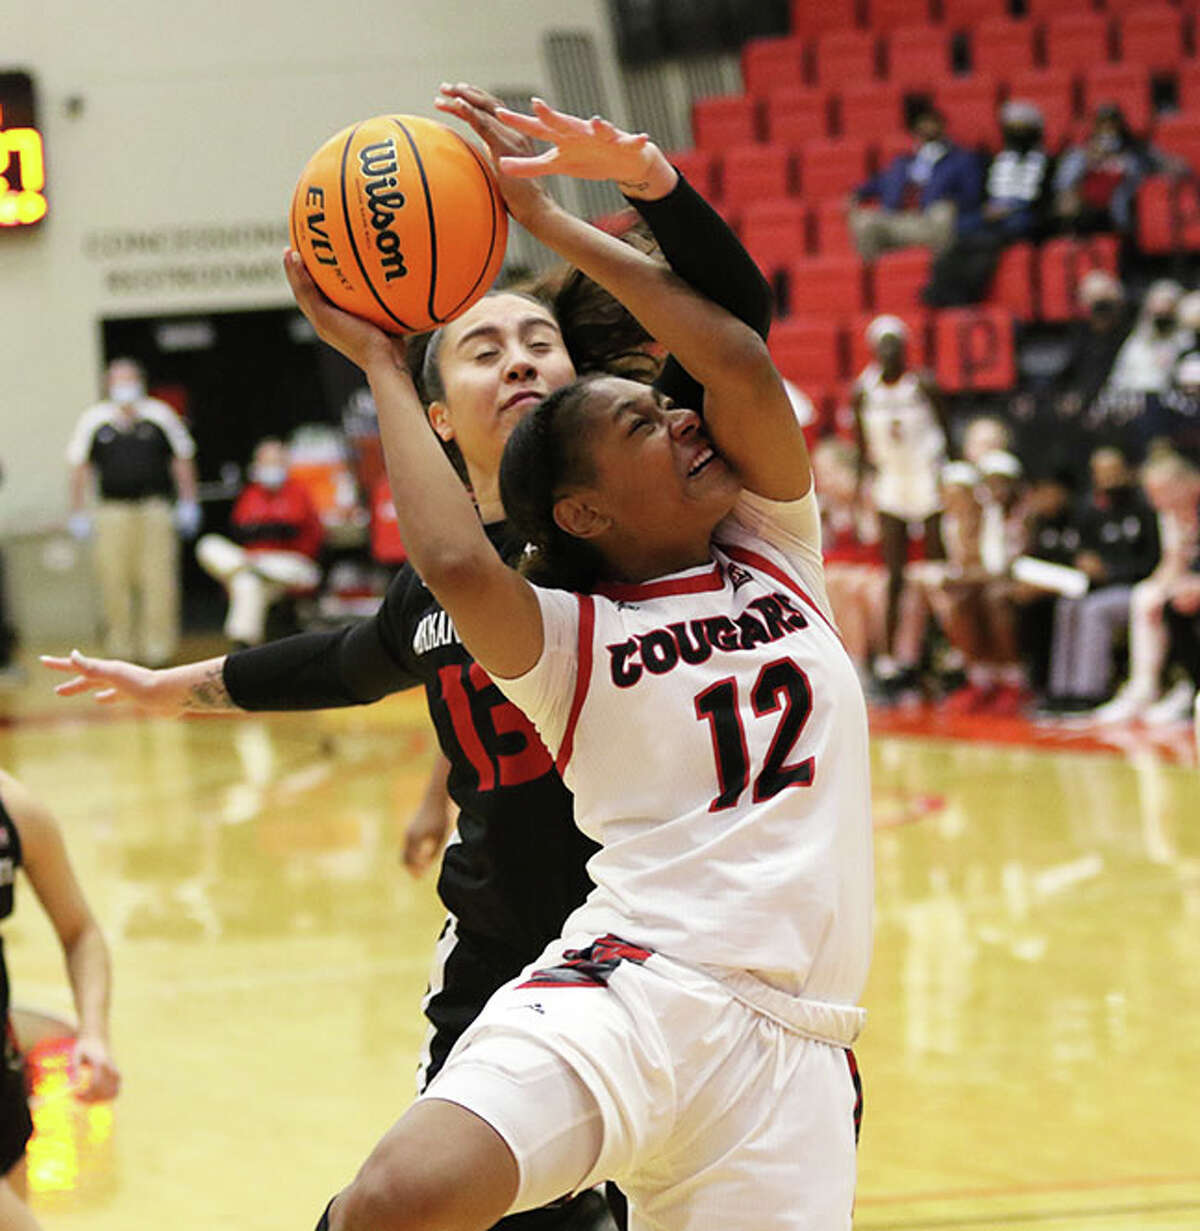 SIUE's Mikayla Kinnard (12) shown in a game earlier this season in Edwardsville, scored 14 points Saturday in the Cougars' OVC win at Morehead State.